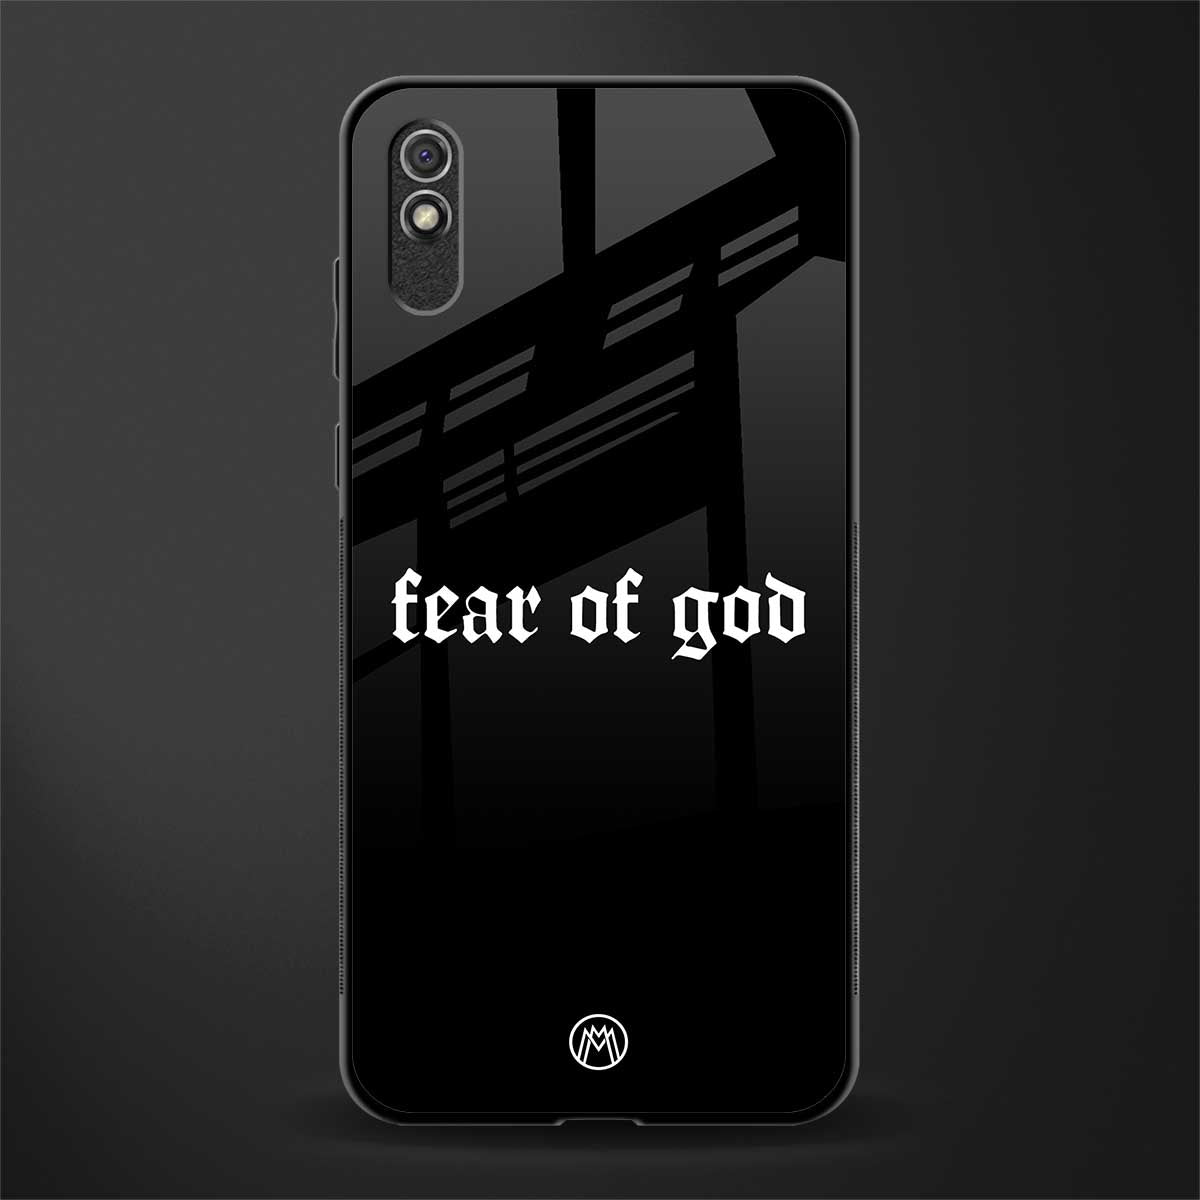 fear of god phone cover for redmi 9i